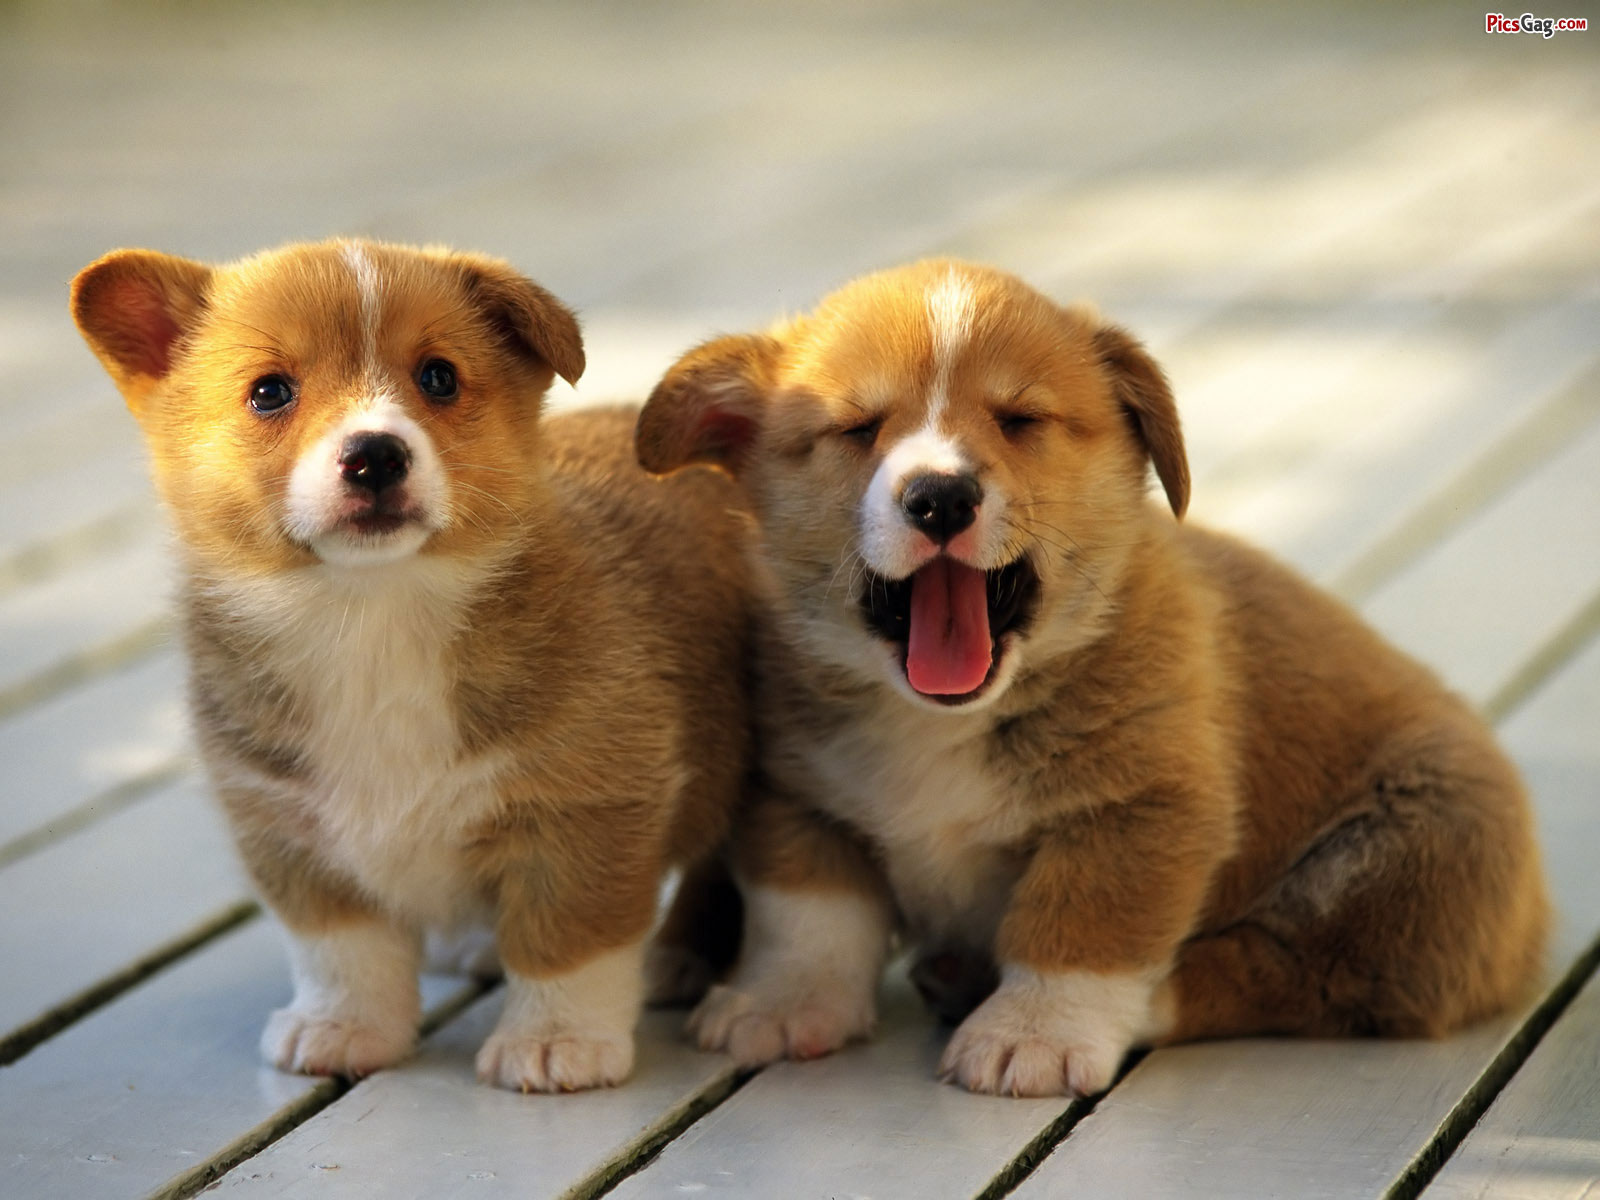 Mobile Desktop Background Cute And Funny Pictures Of Dogs And Puppies Download